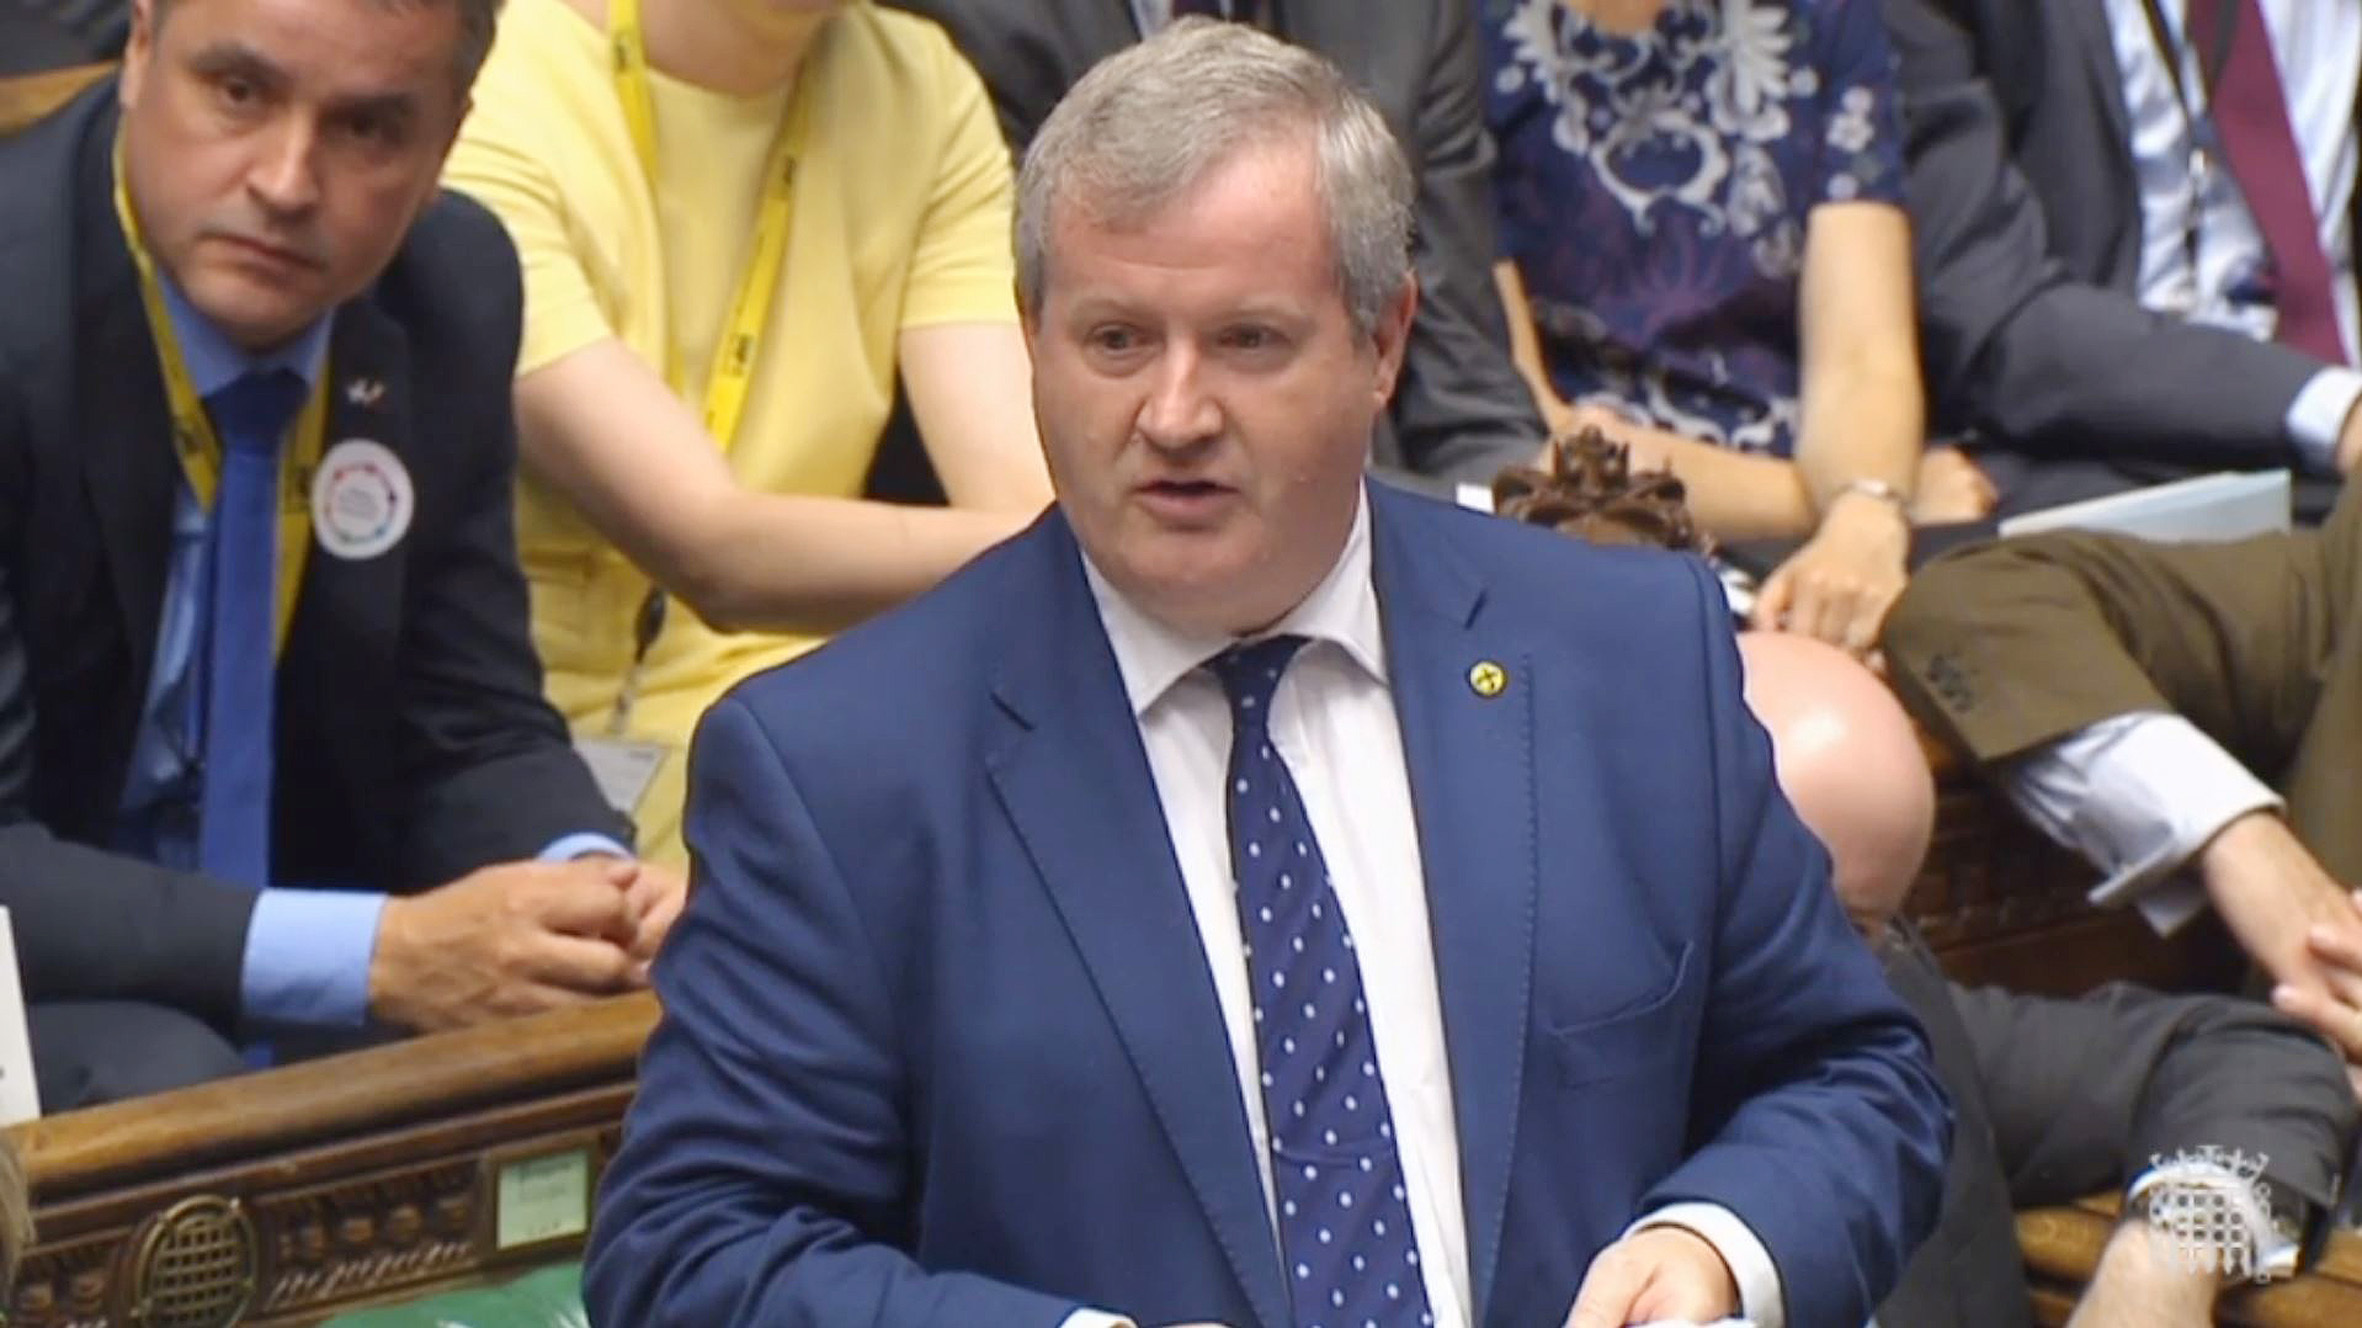 SNP Westminster leader Ian Blackford (PA Wire)